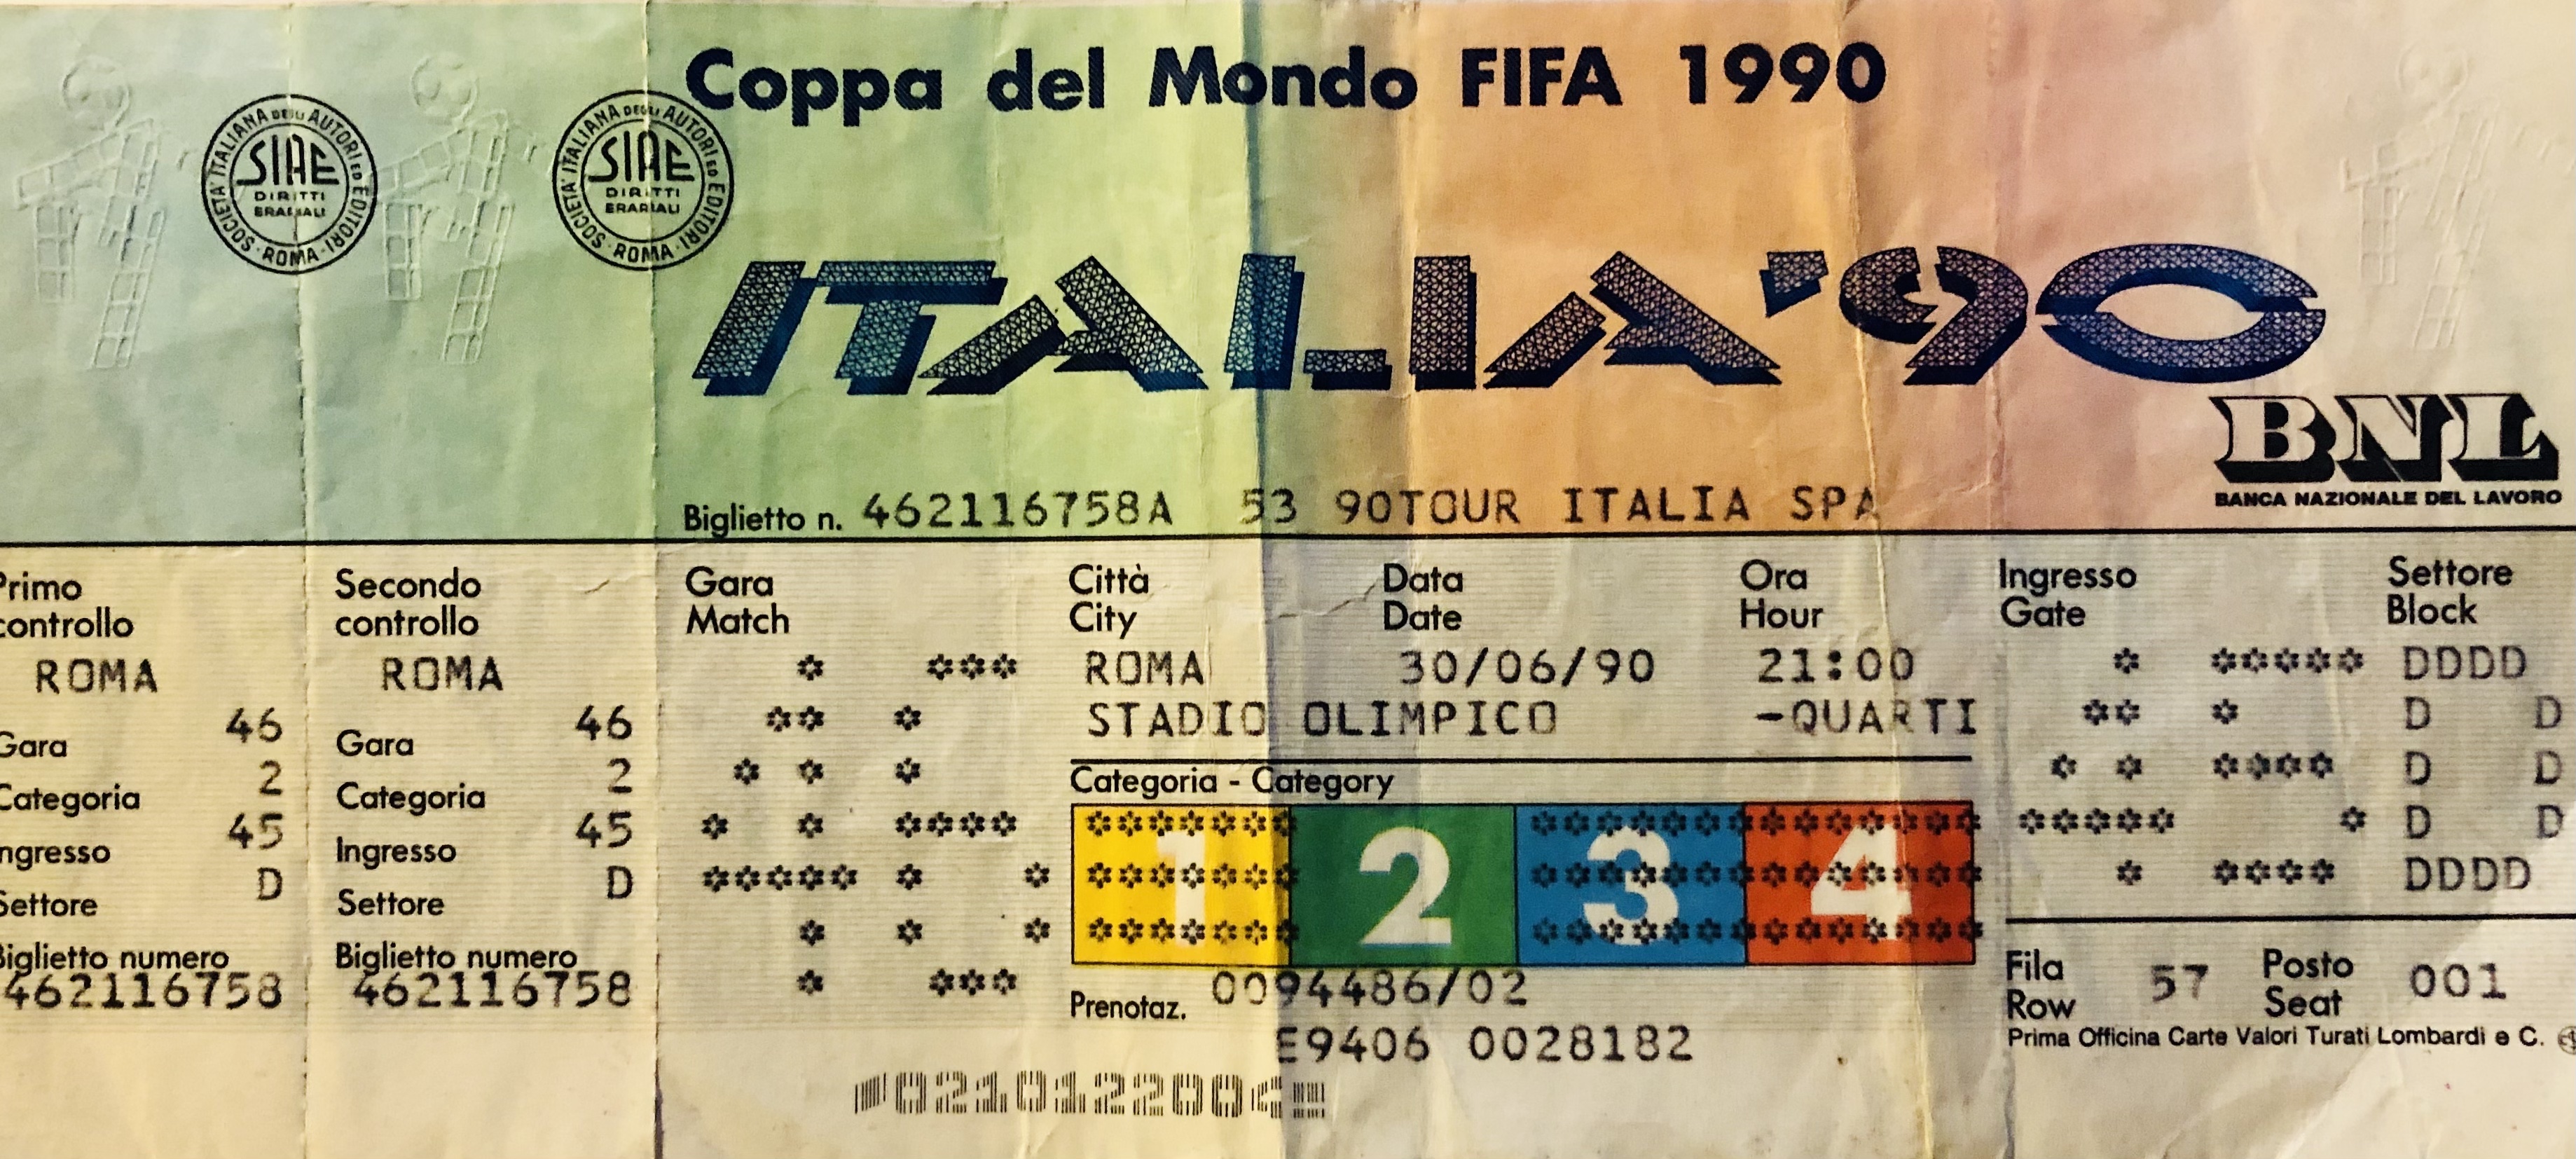 This is one of the unused tickets for the quarter final of Italia '90 that wasn't sold! Worth a fortune then, and possibly still is!